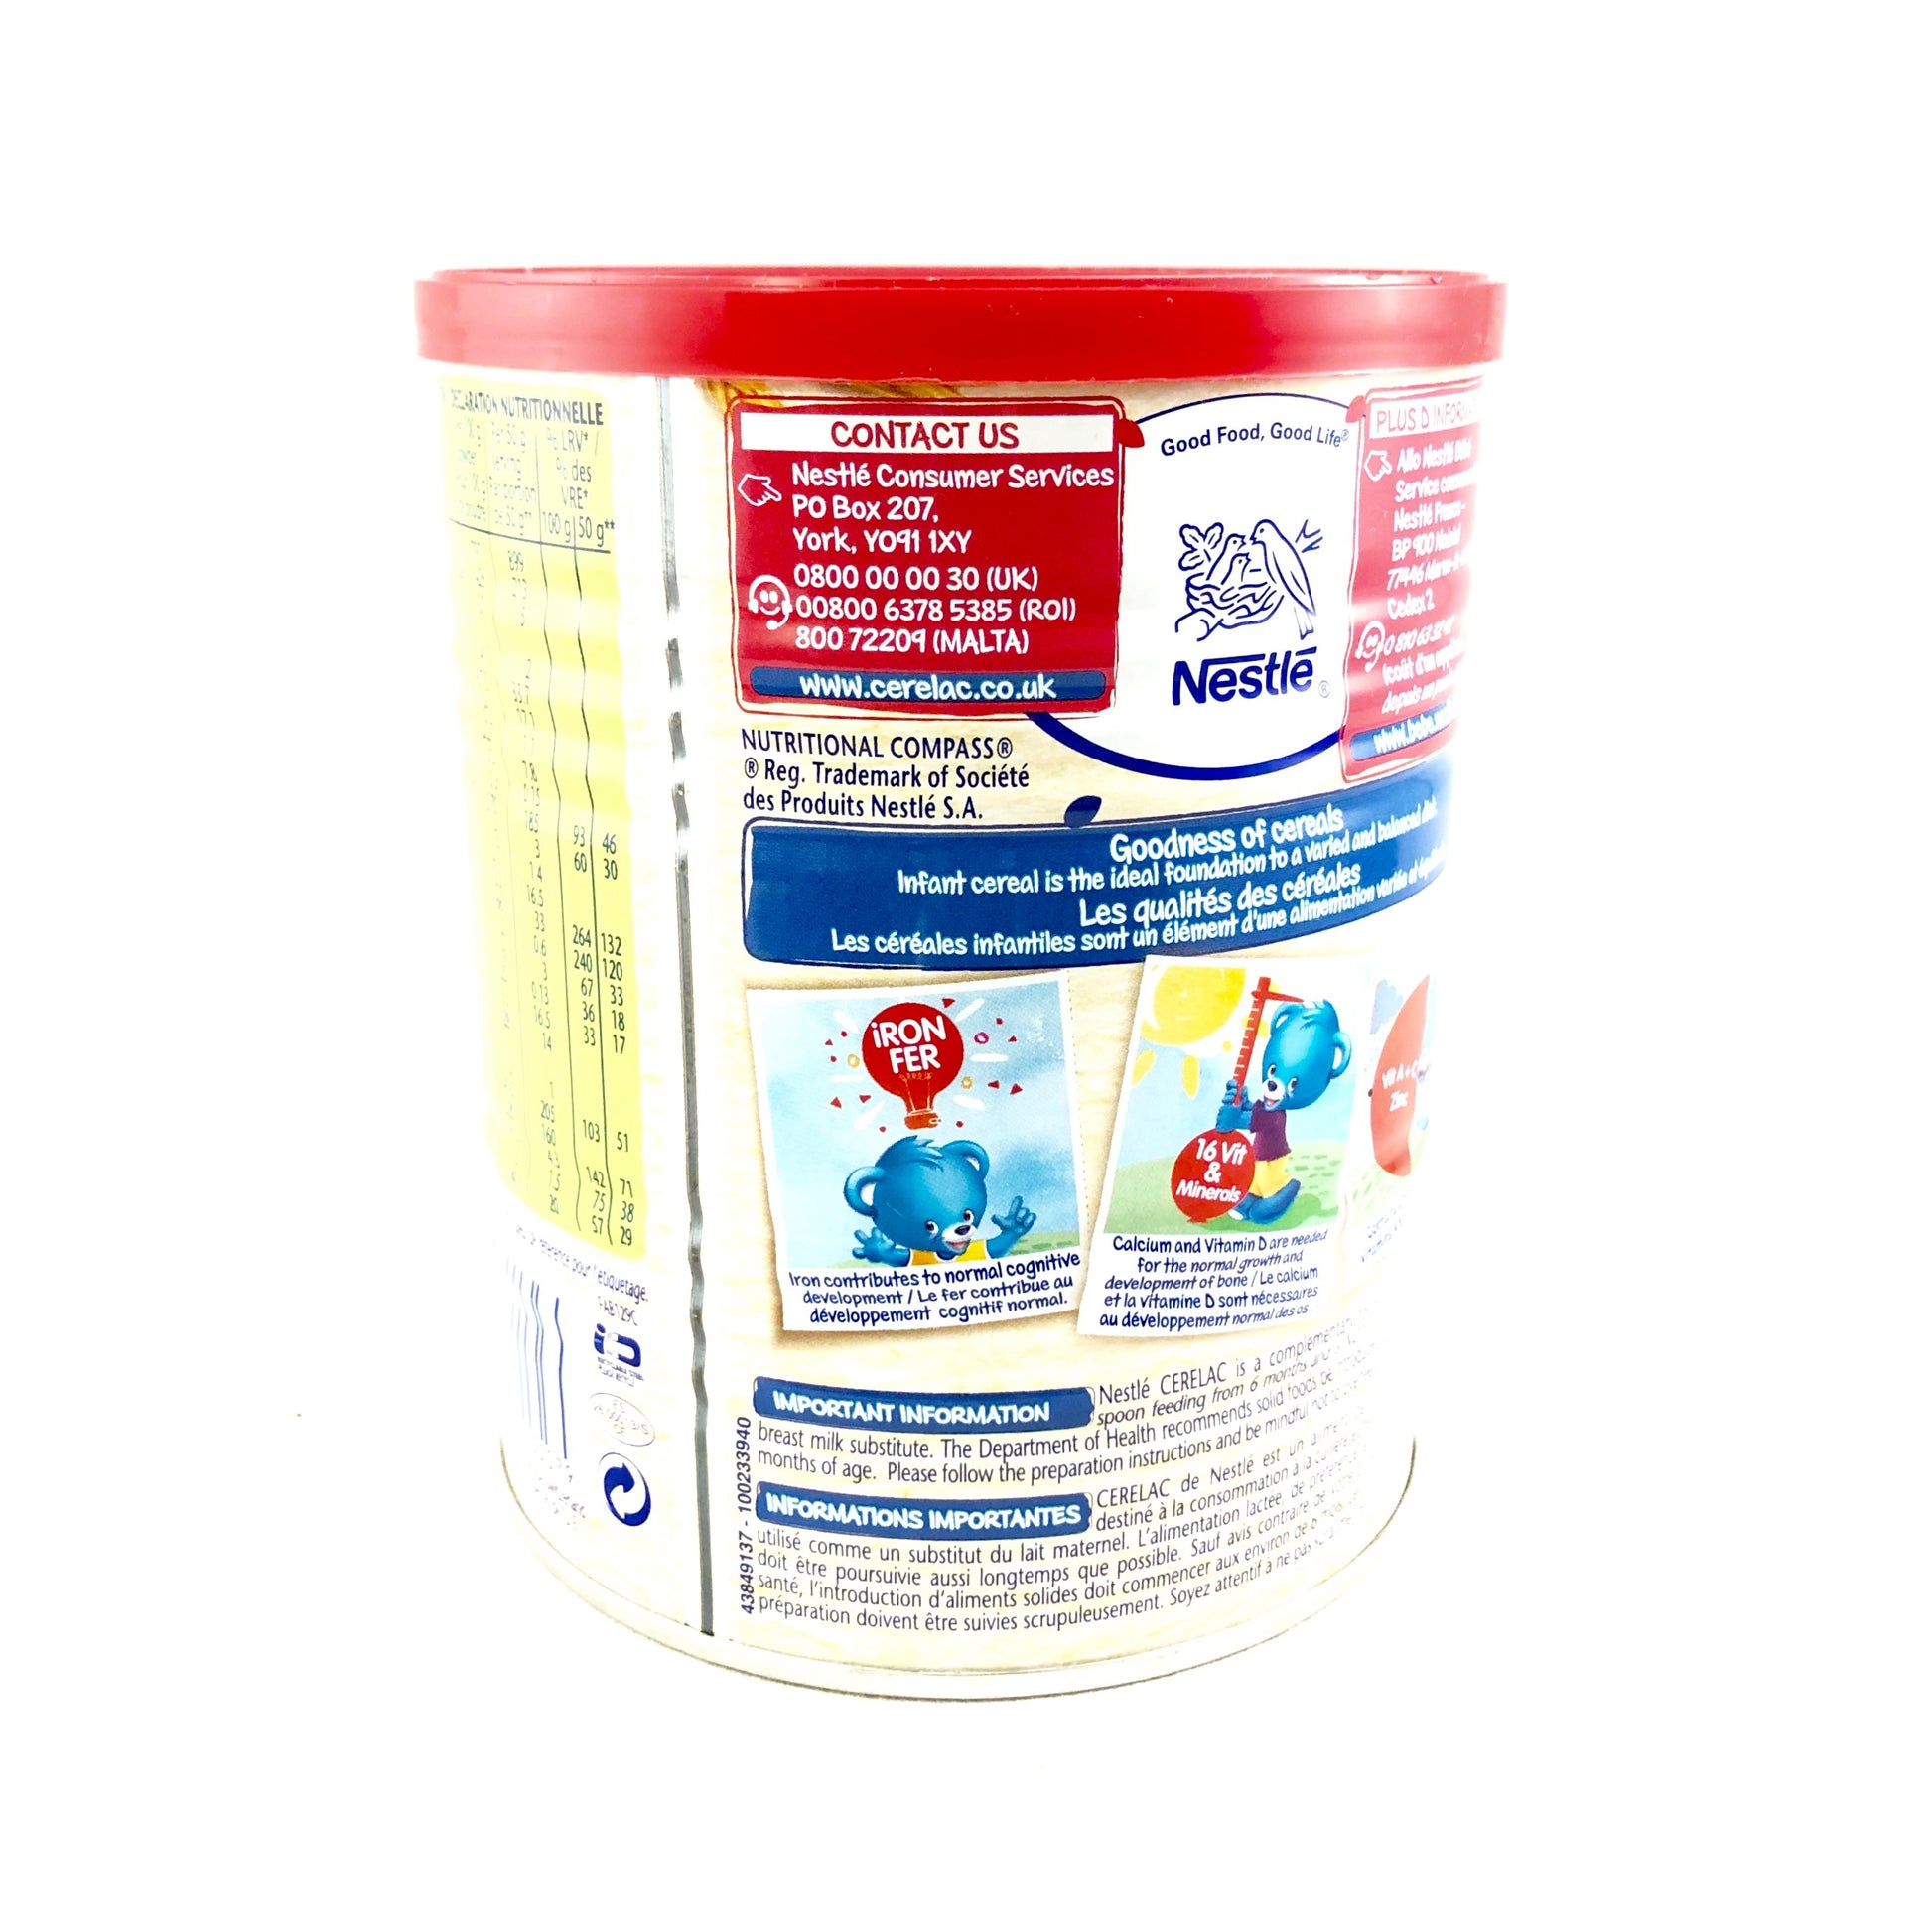 Cerelac Wheat With Milk 400g - Red - Break Stop